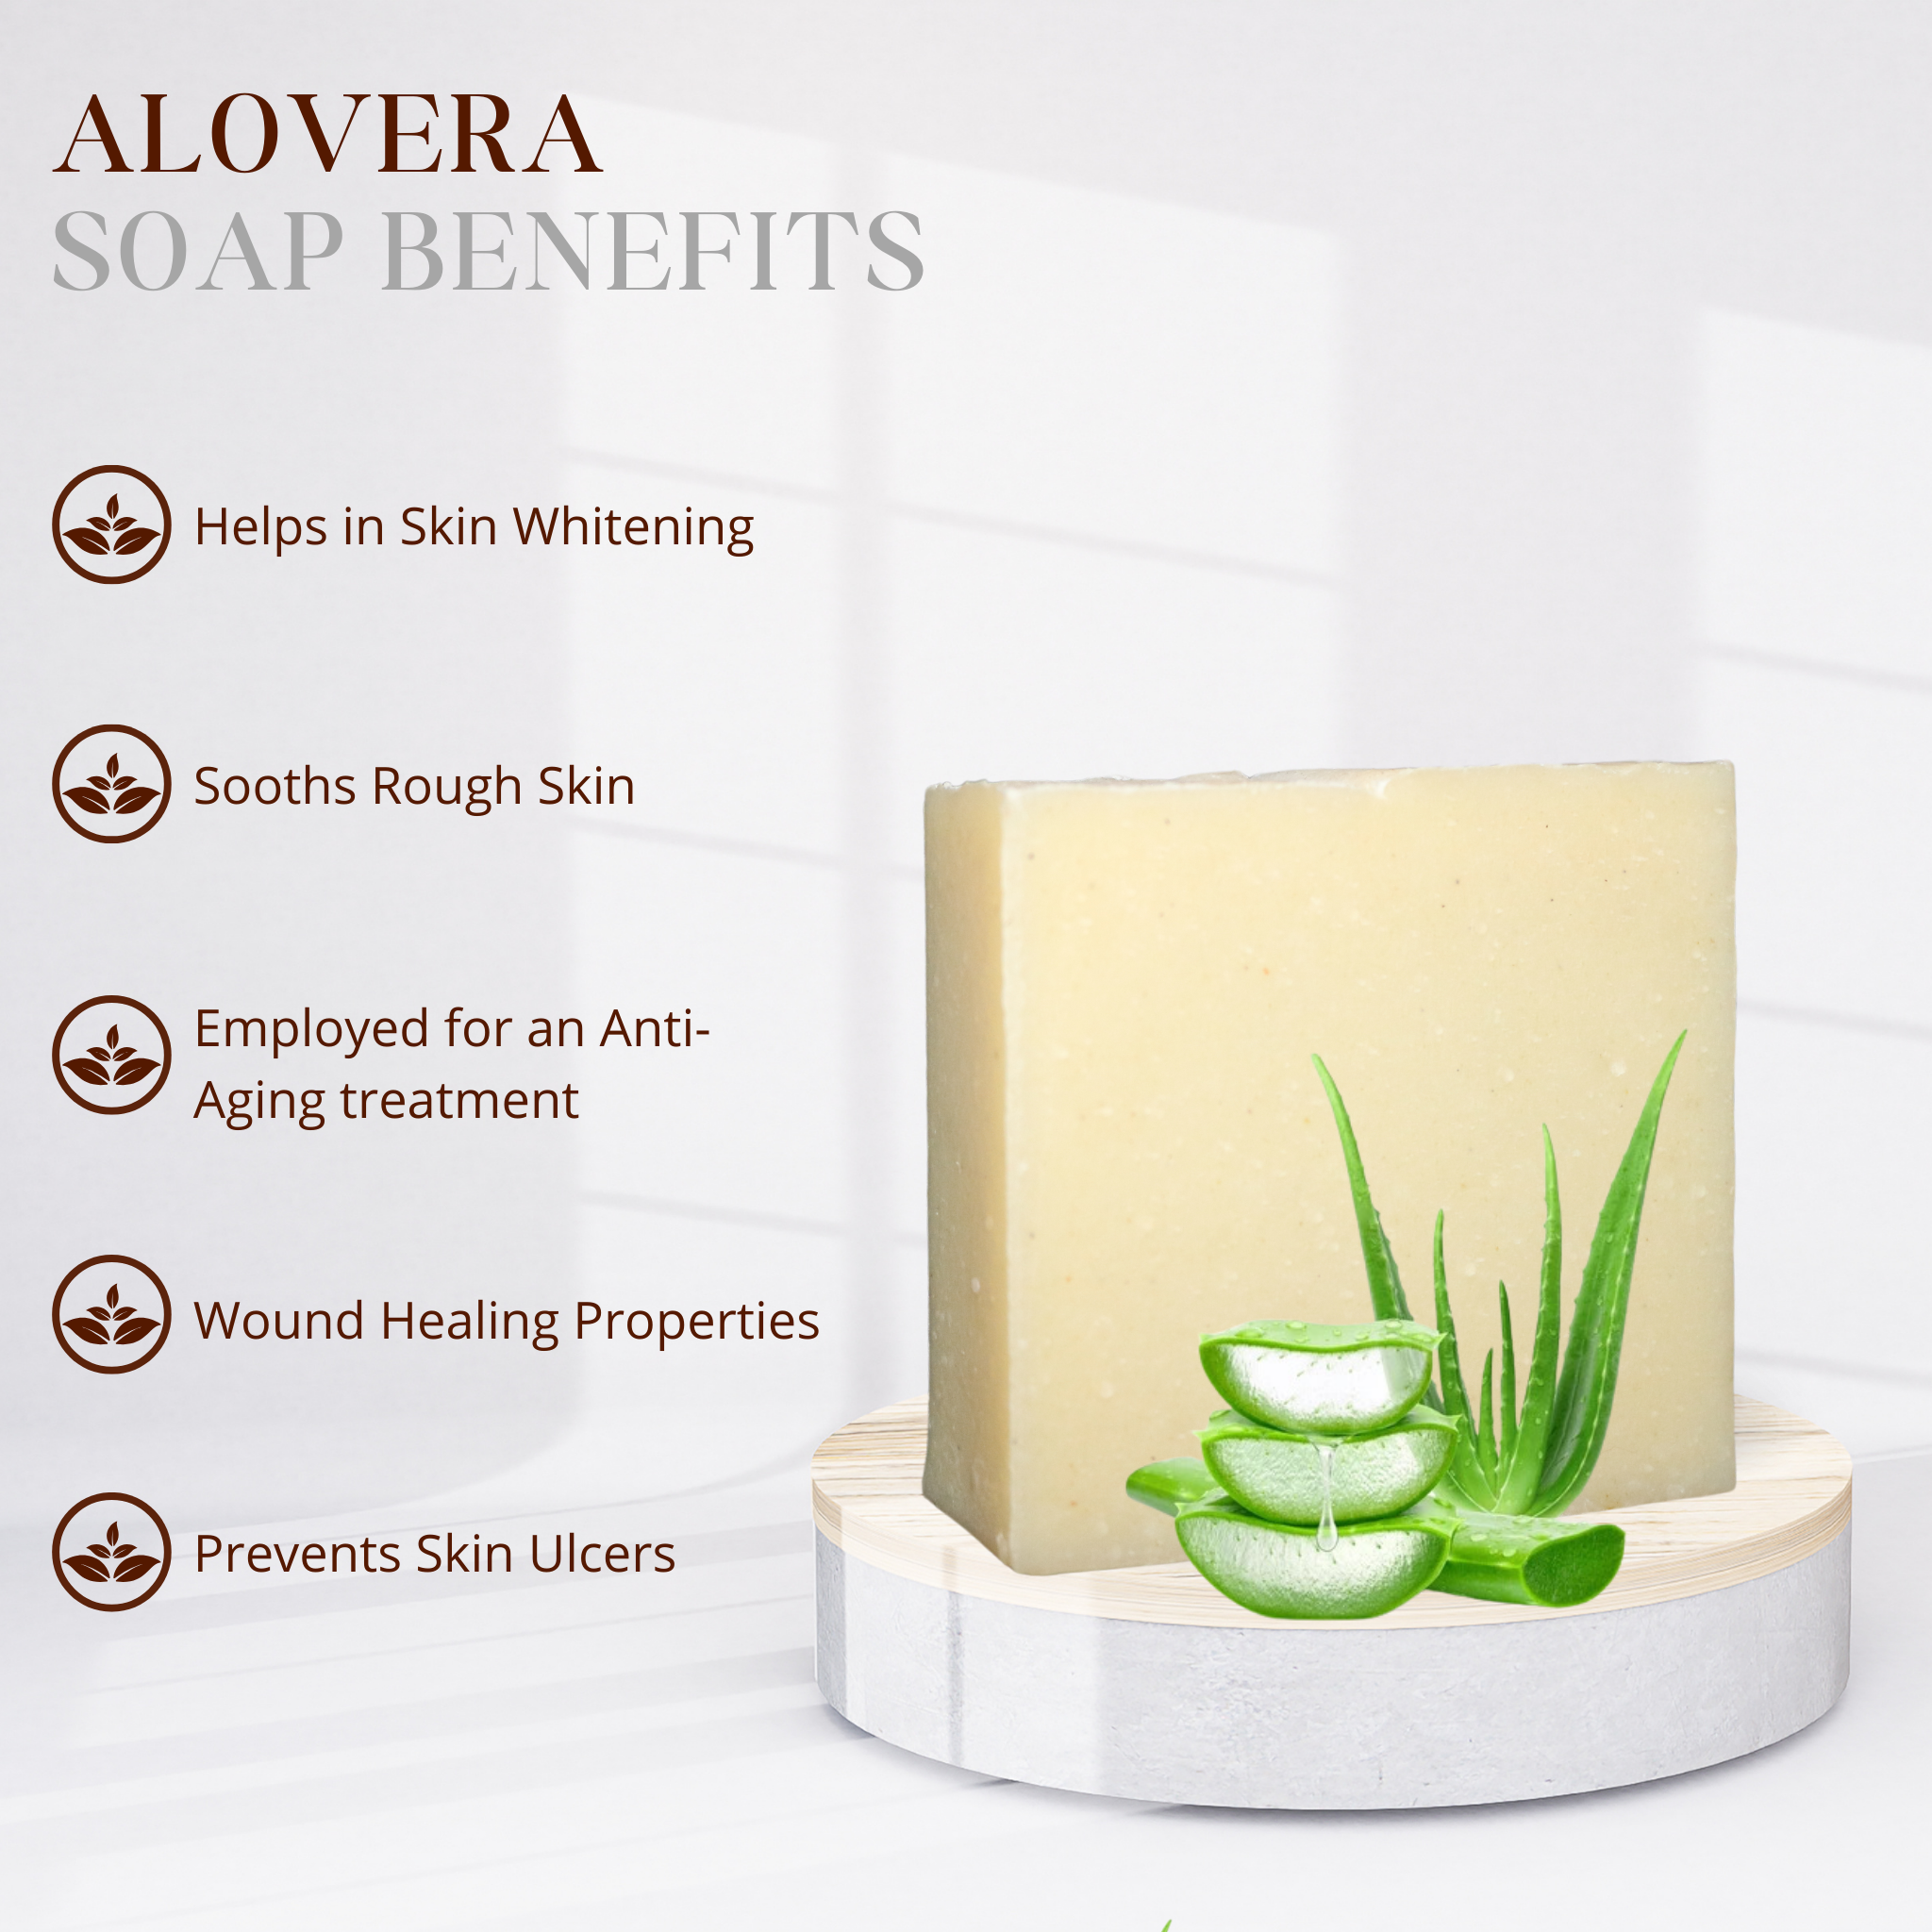 HANDMADE COLD PROCESSED ALOEVERA SOAP FOR MOISTURIZING, SOOTHING AND WHITE SKIN.